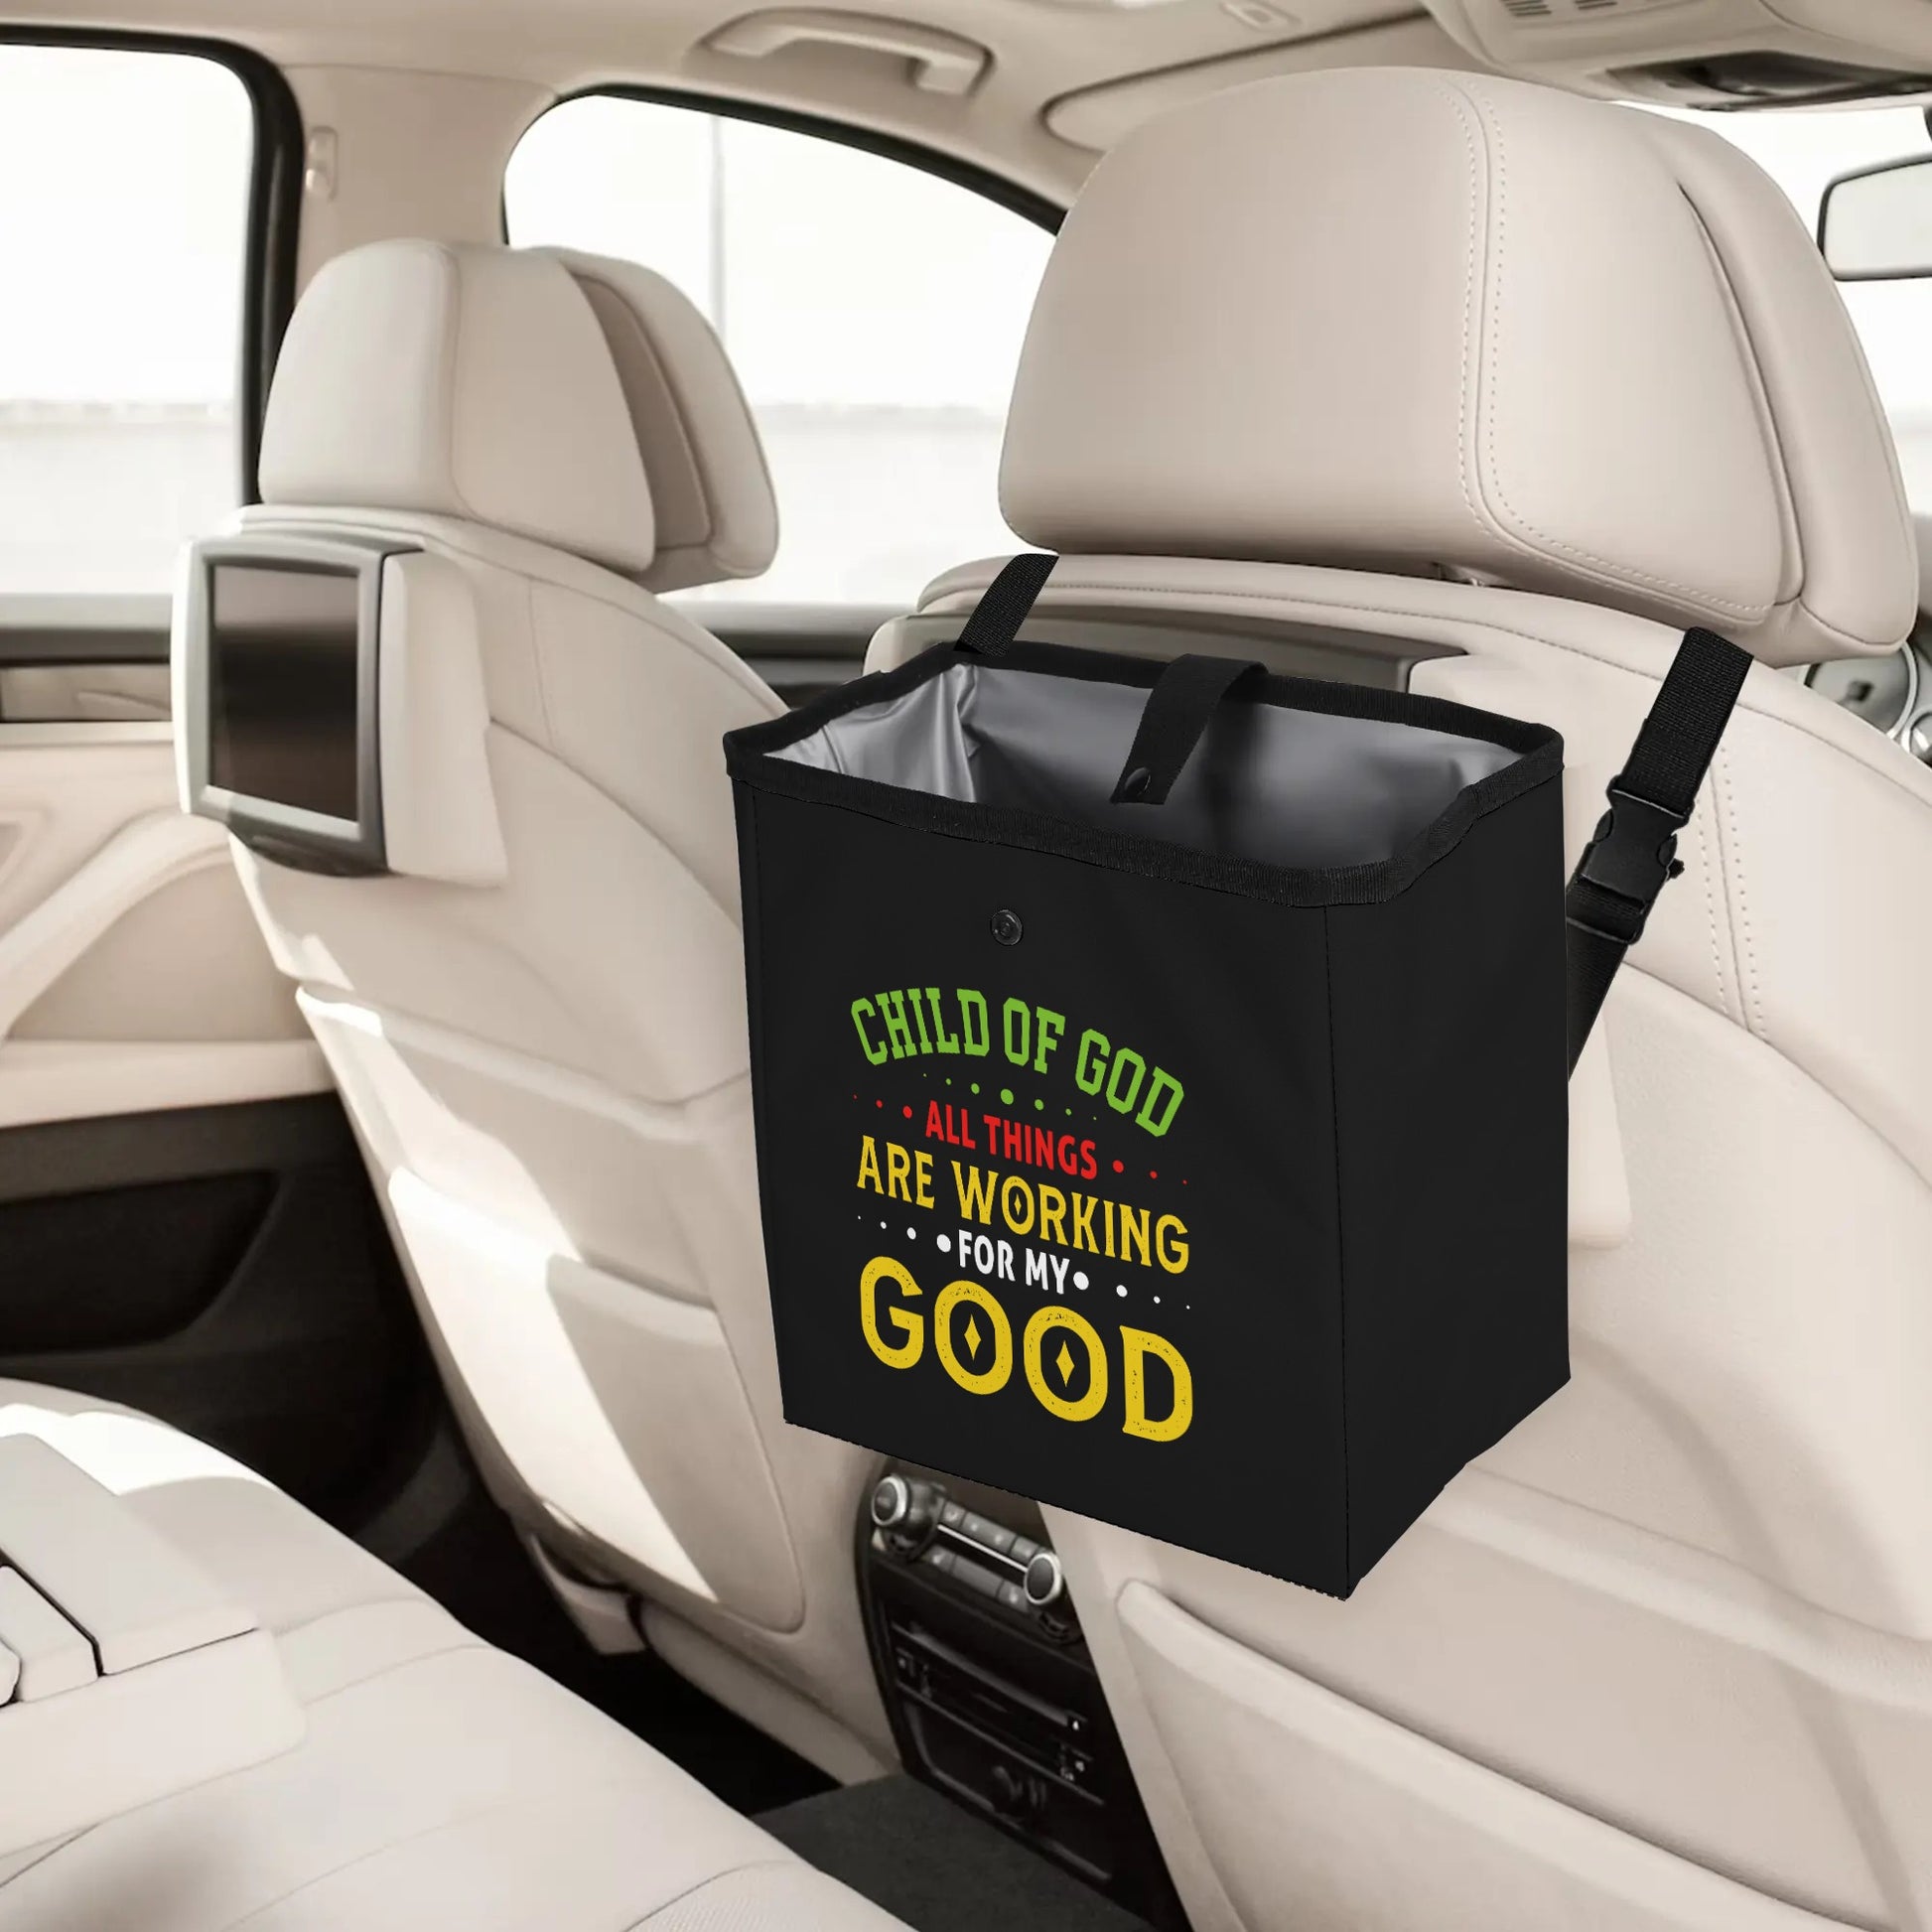 Child Of God All Things Are Working For My Good Hanging Storage Trash Car Organizer Bag Christian Car Accessories popcustoms